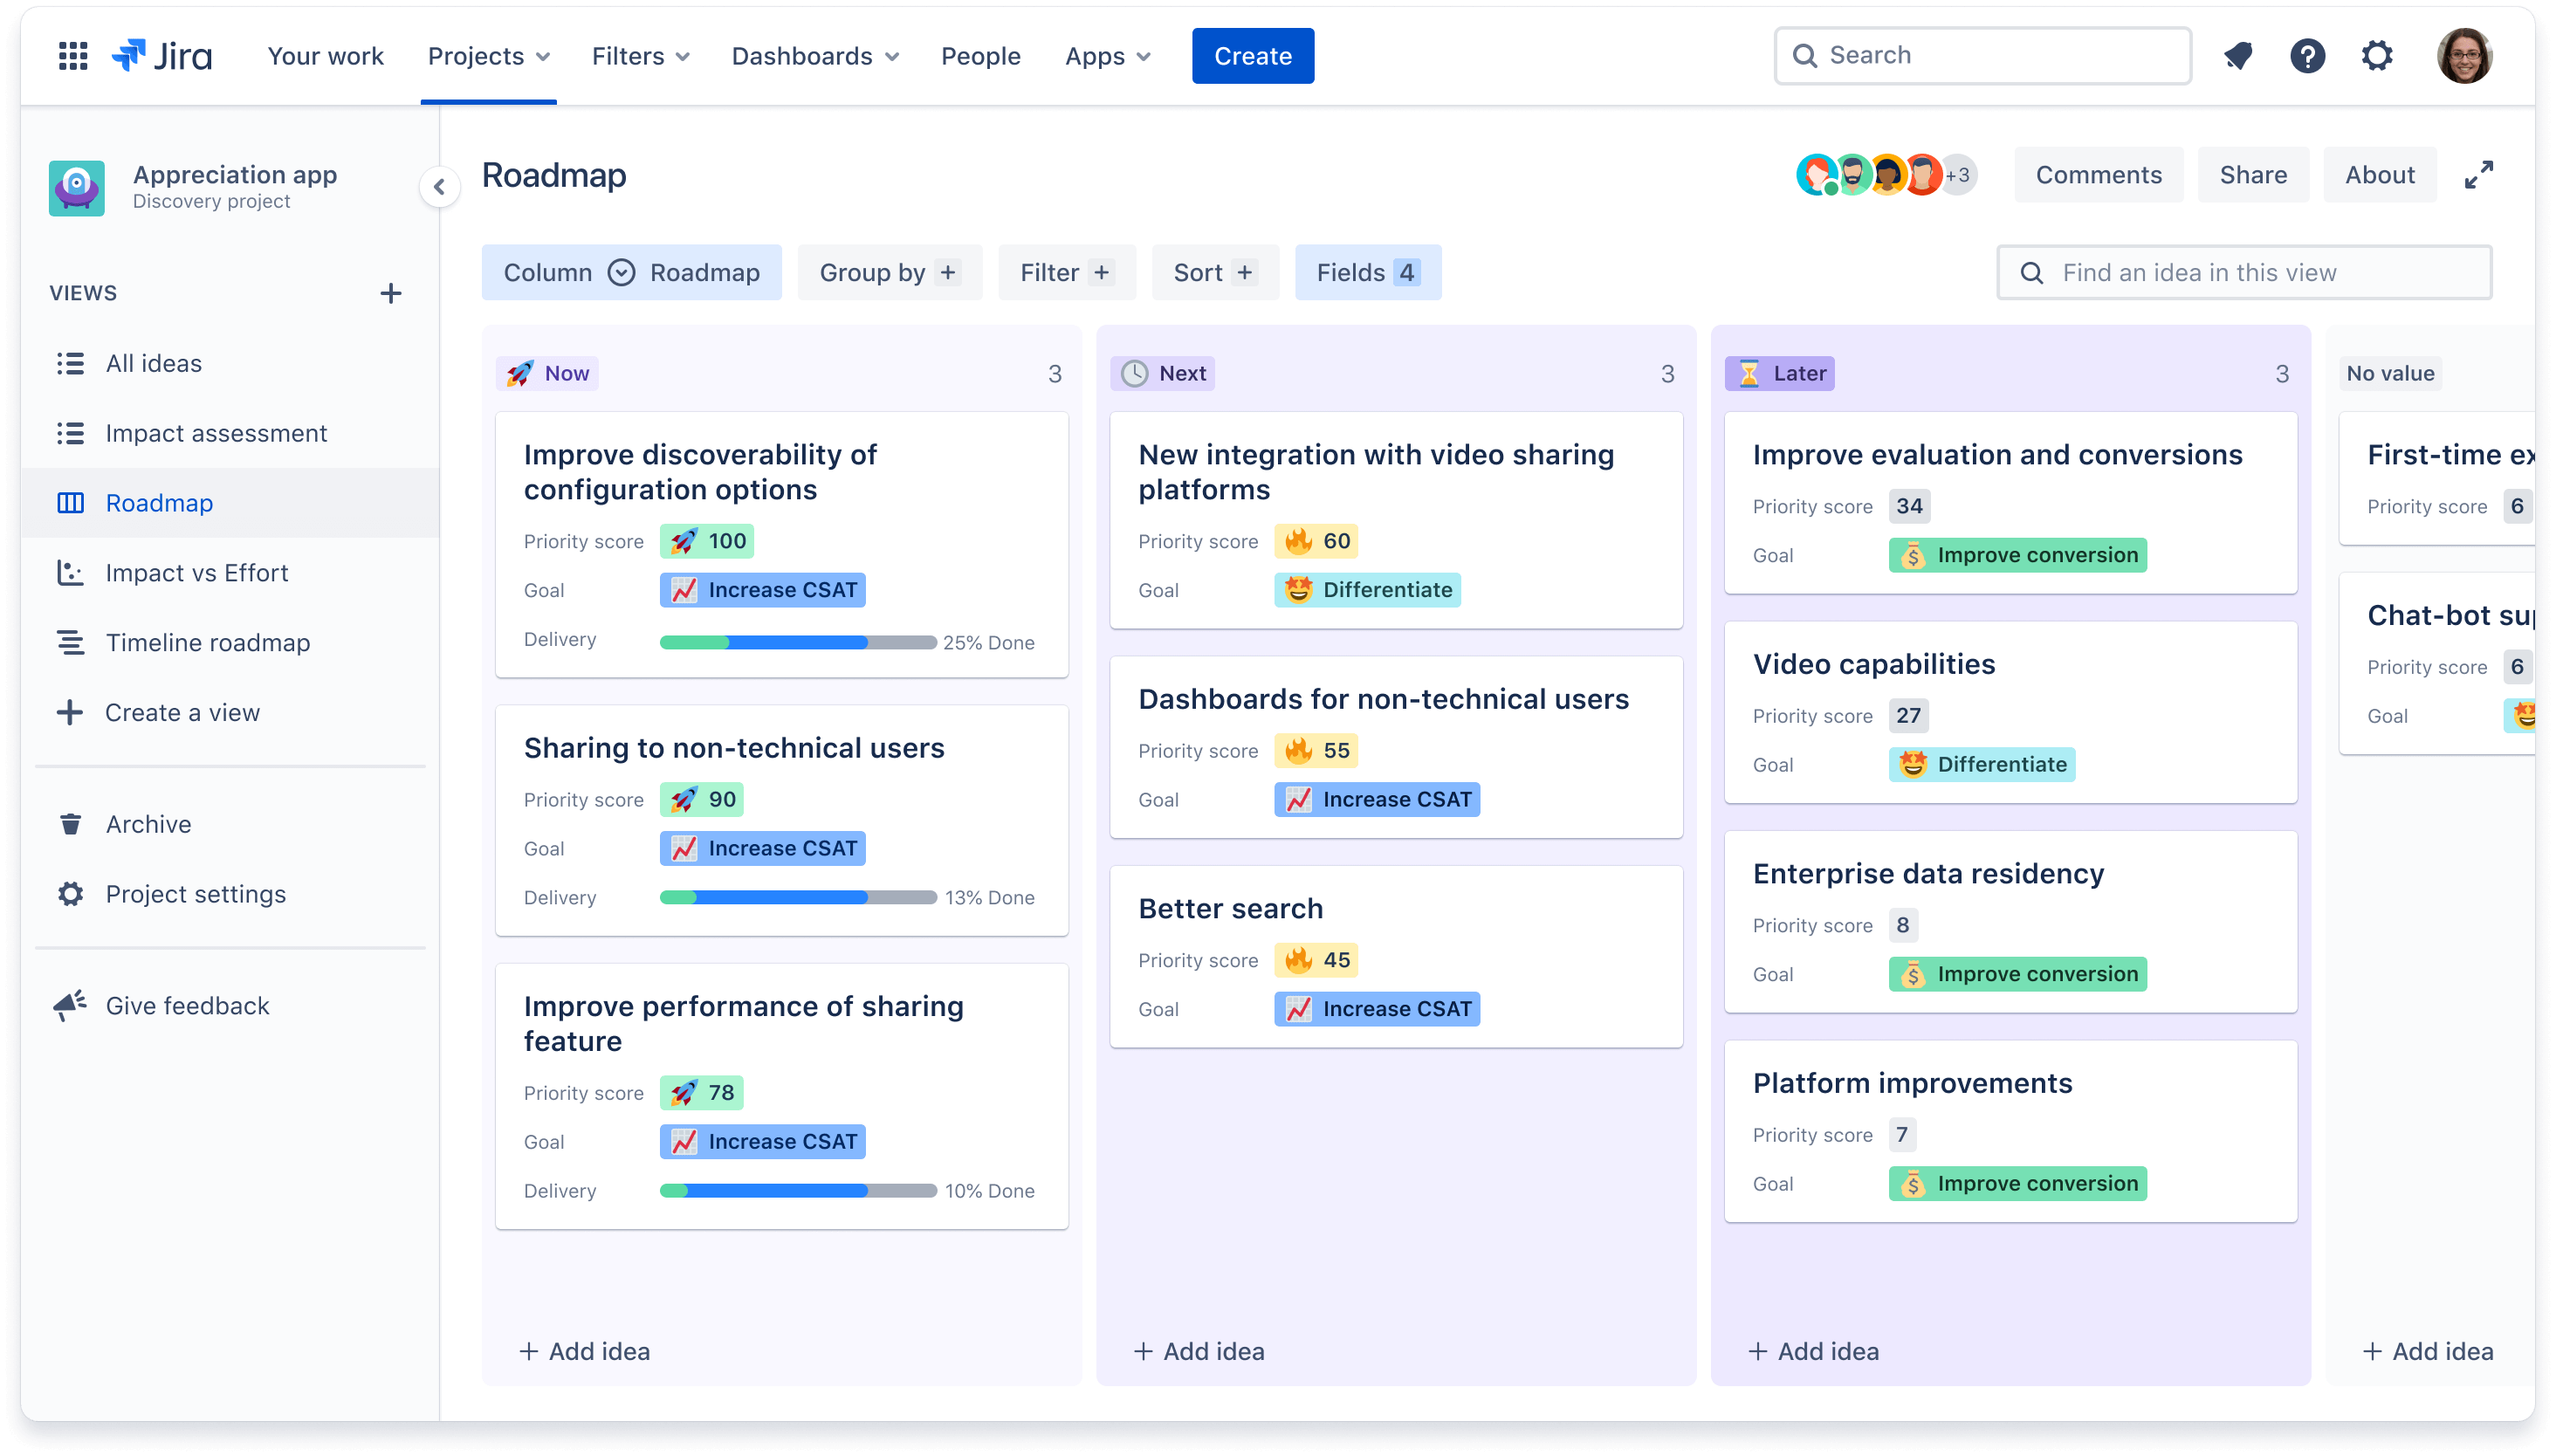 Product roadmap in Jira showing now, next, and later categories for ideas.